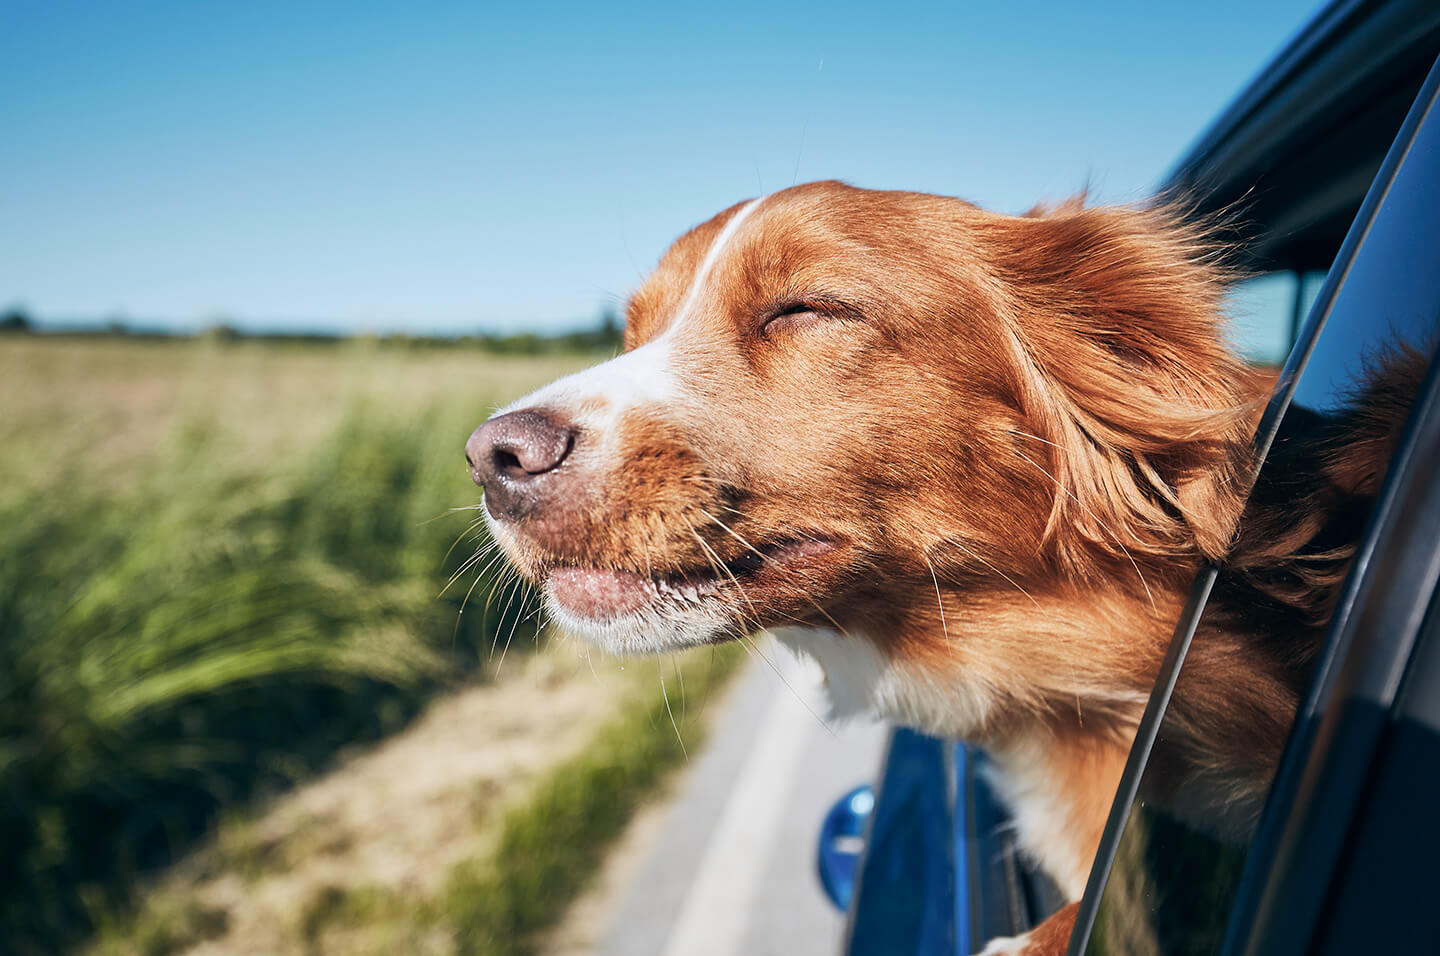 Caramel dog with its head out of window of a moving car. Credit: Chalabala